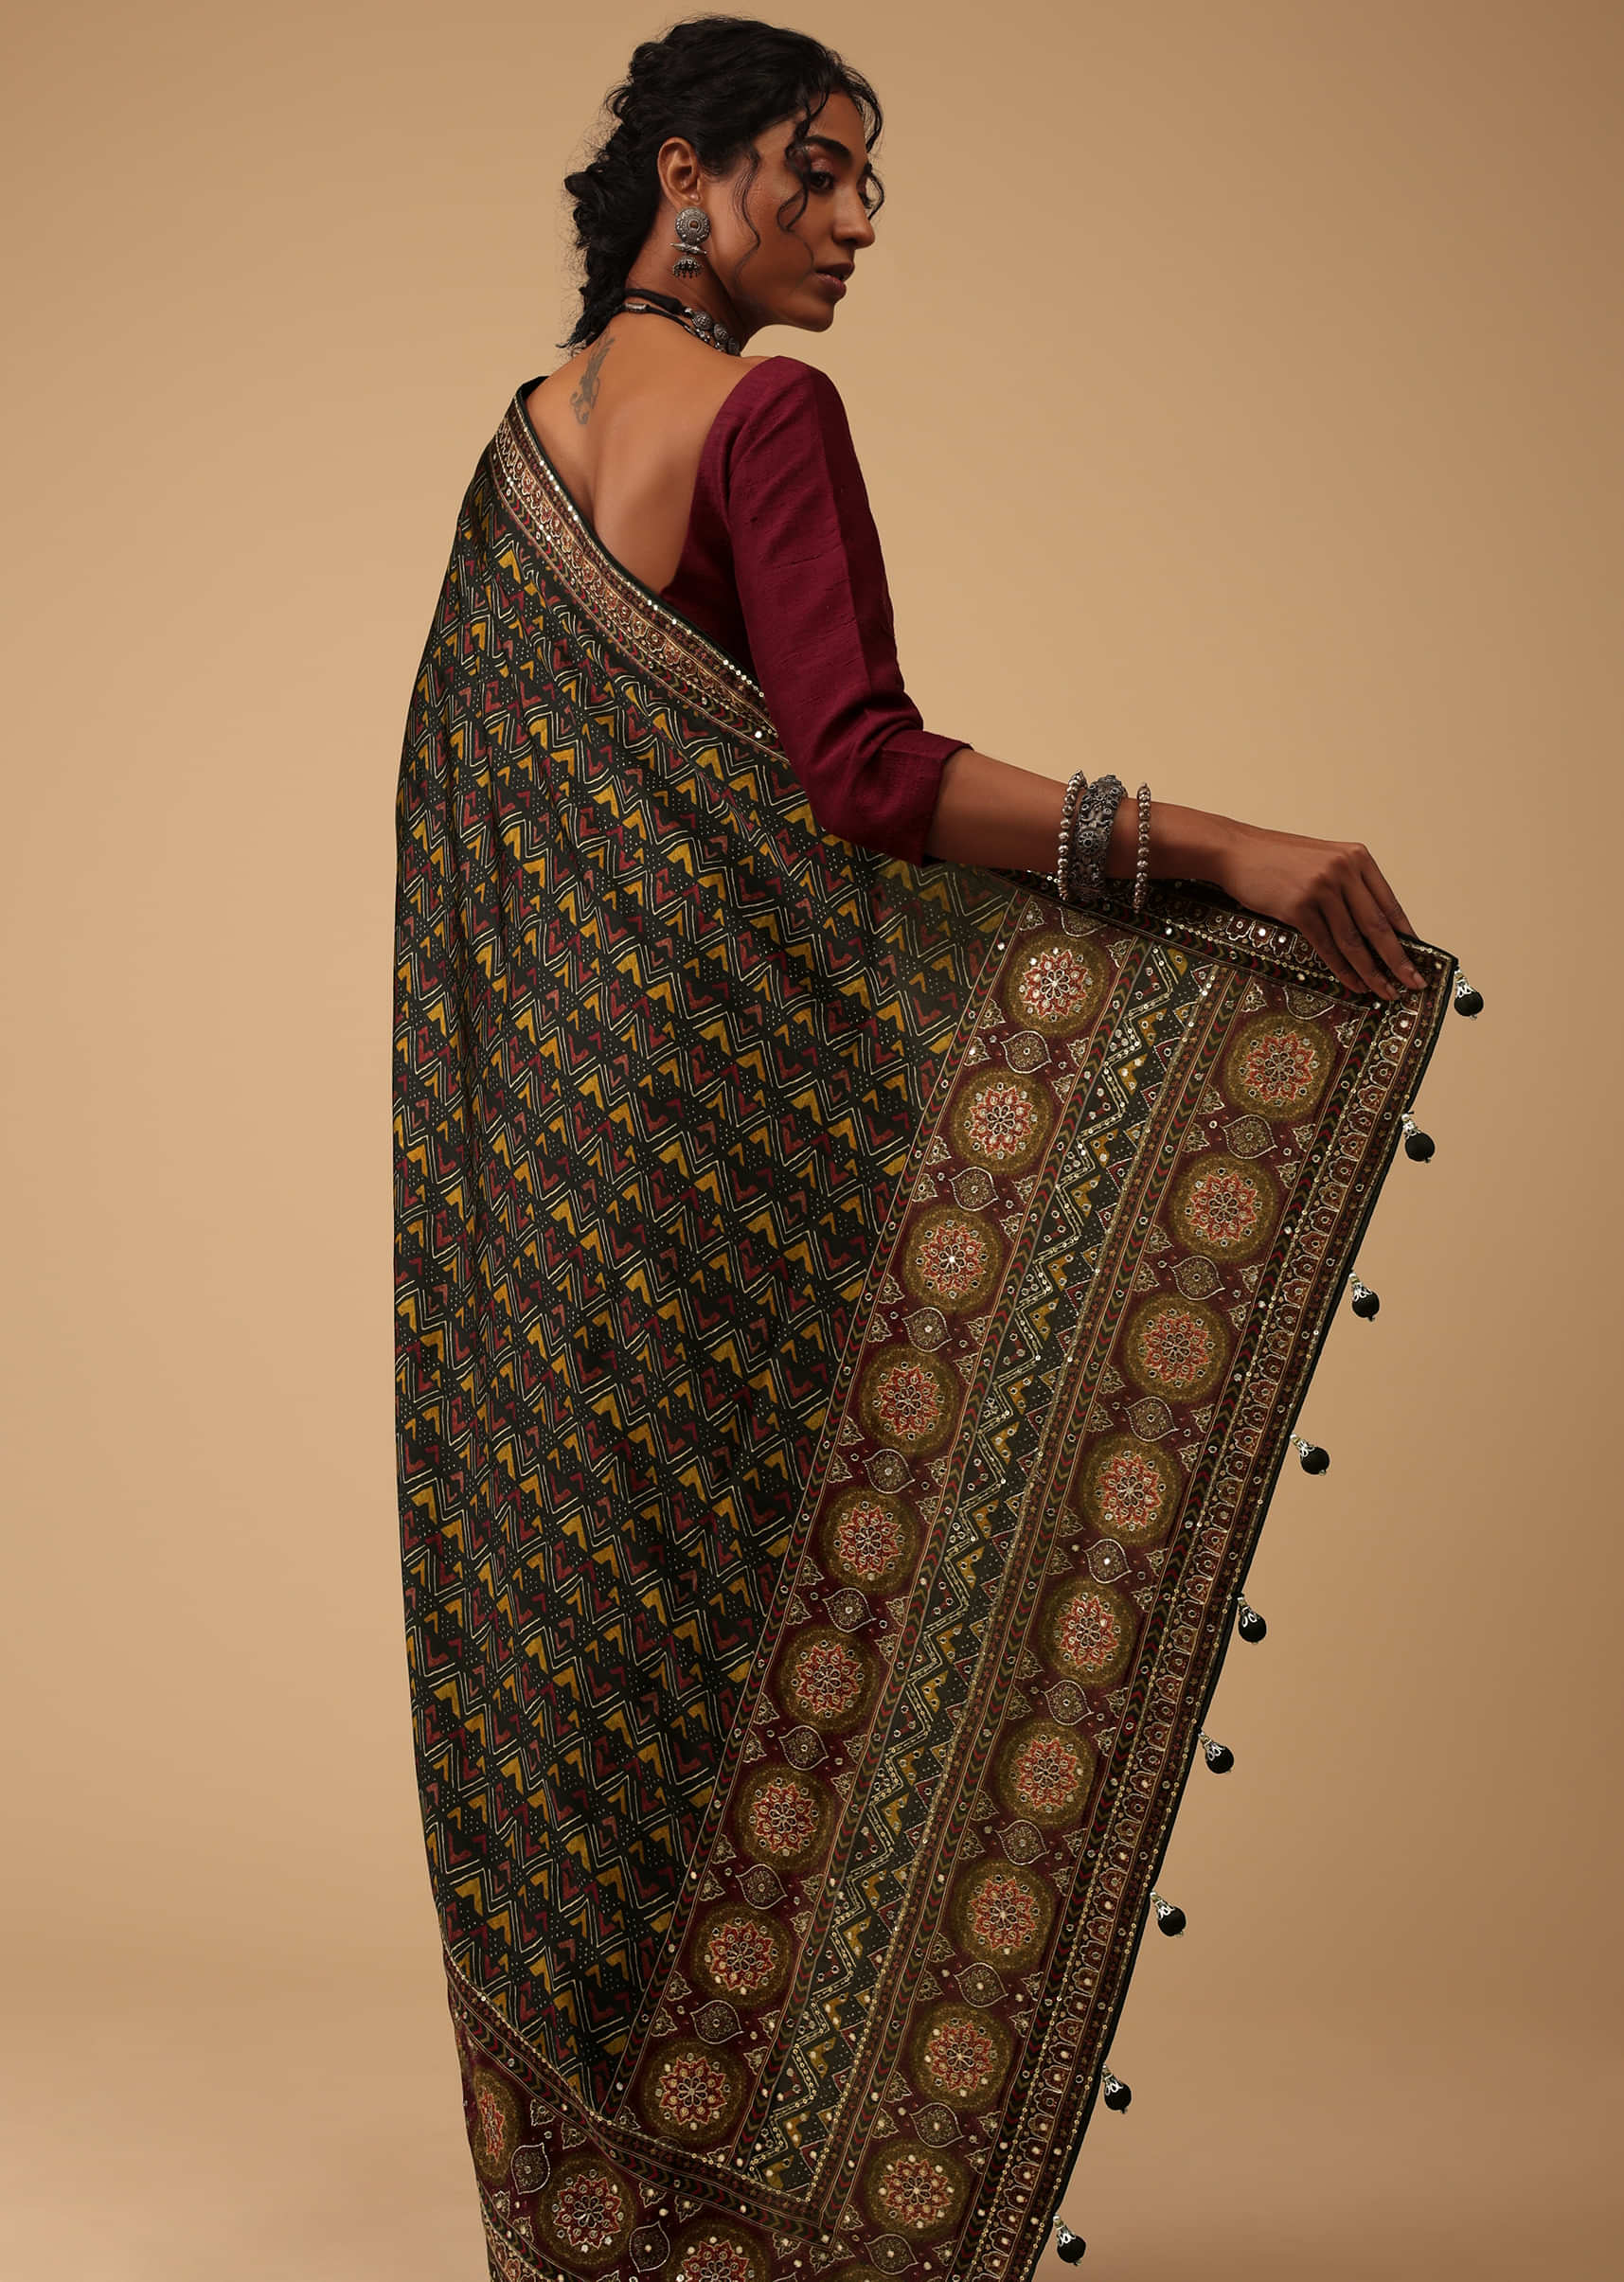 Black Ajrakh Printed Saree In Muslin With Sequins And Mirrors On The Borders